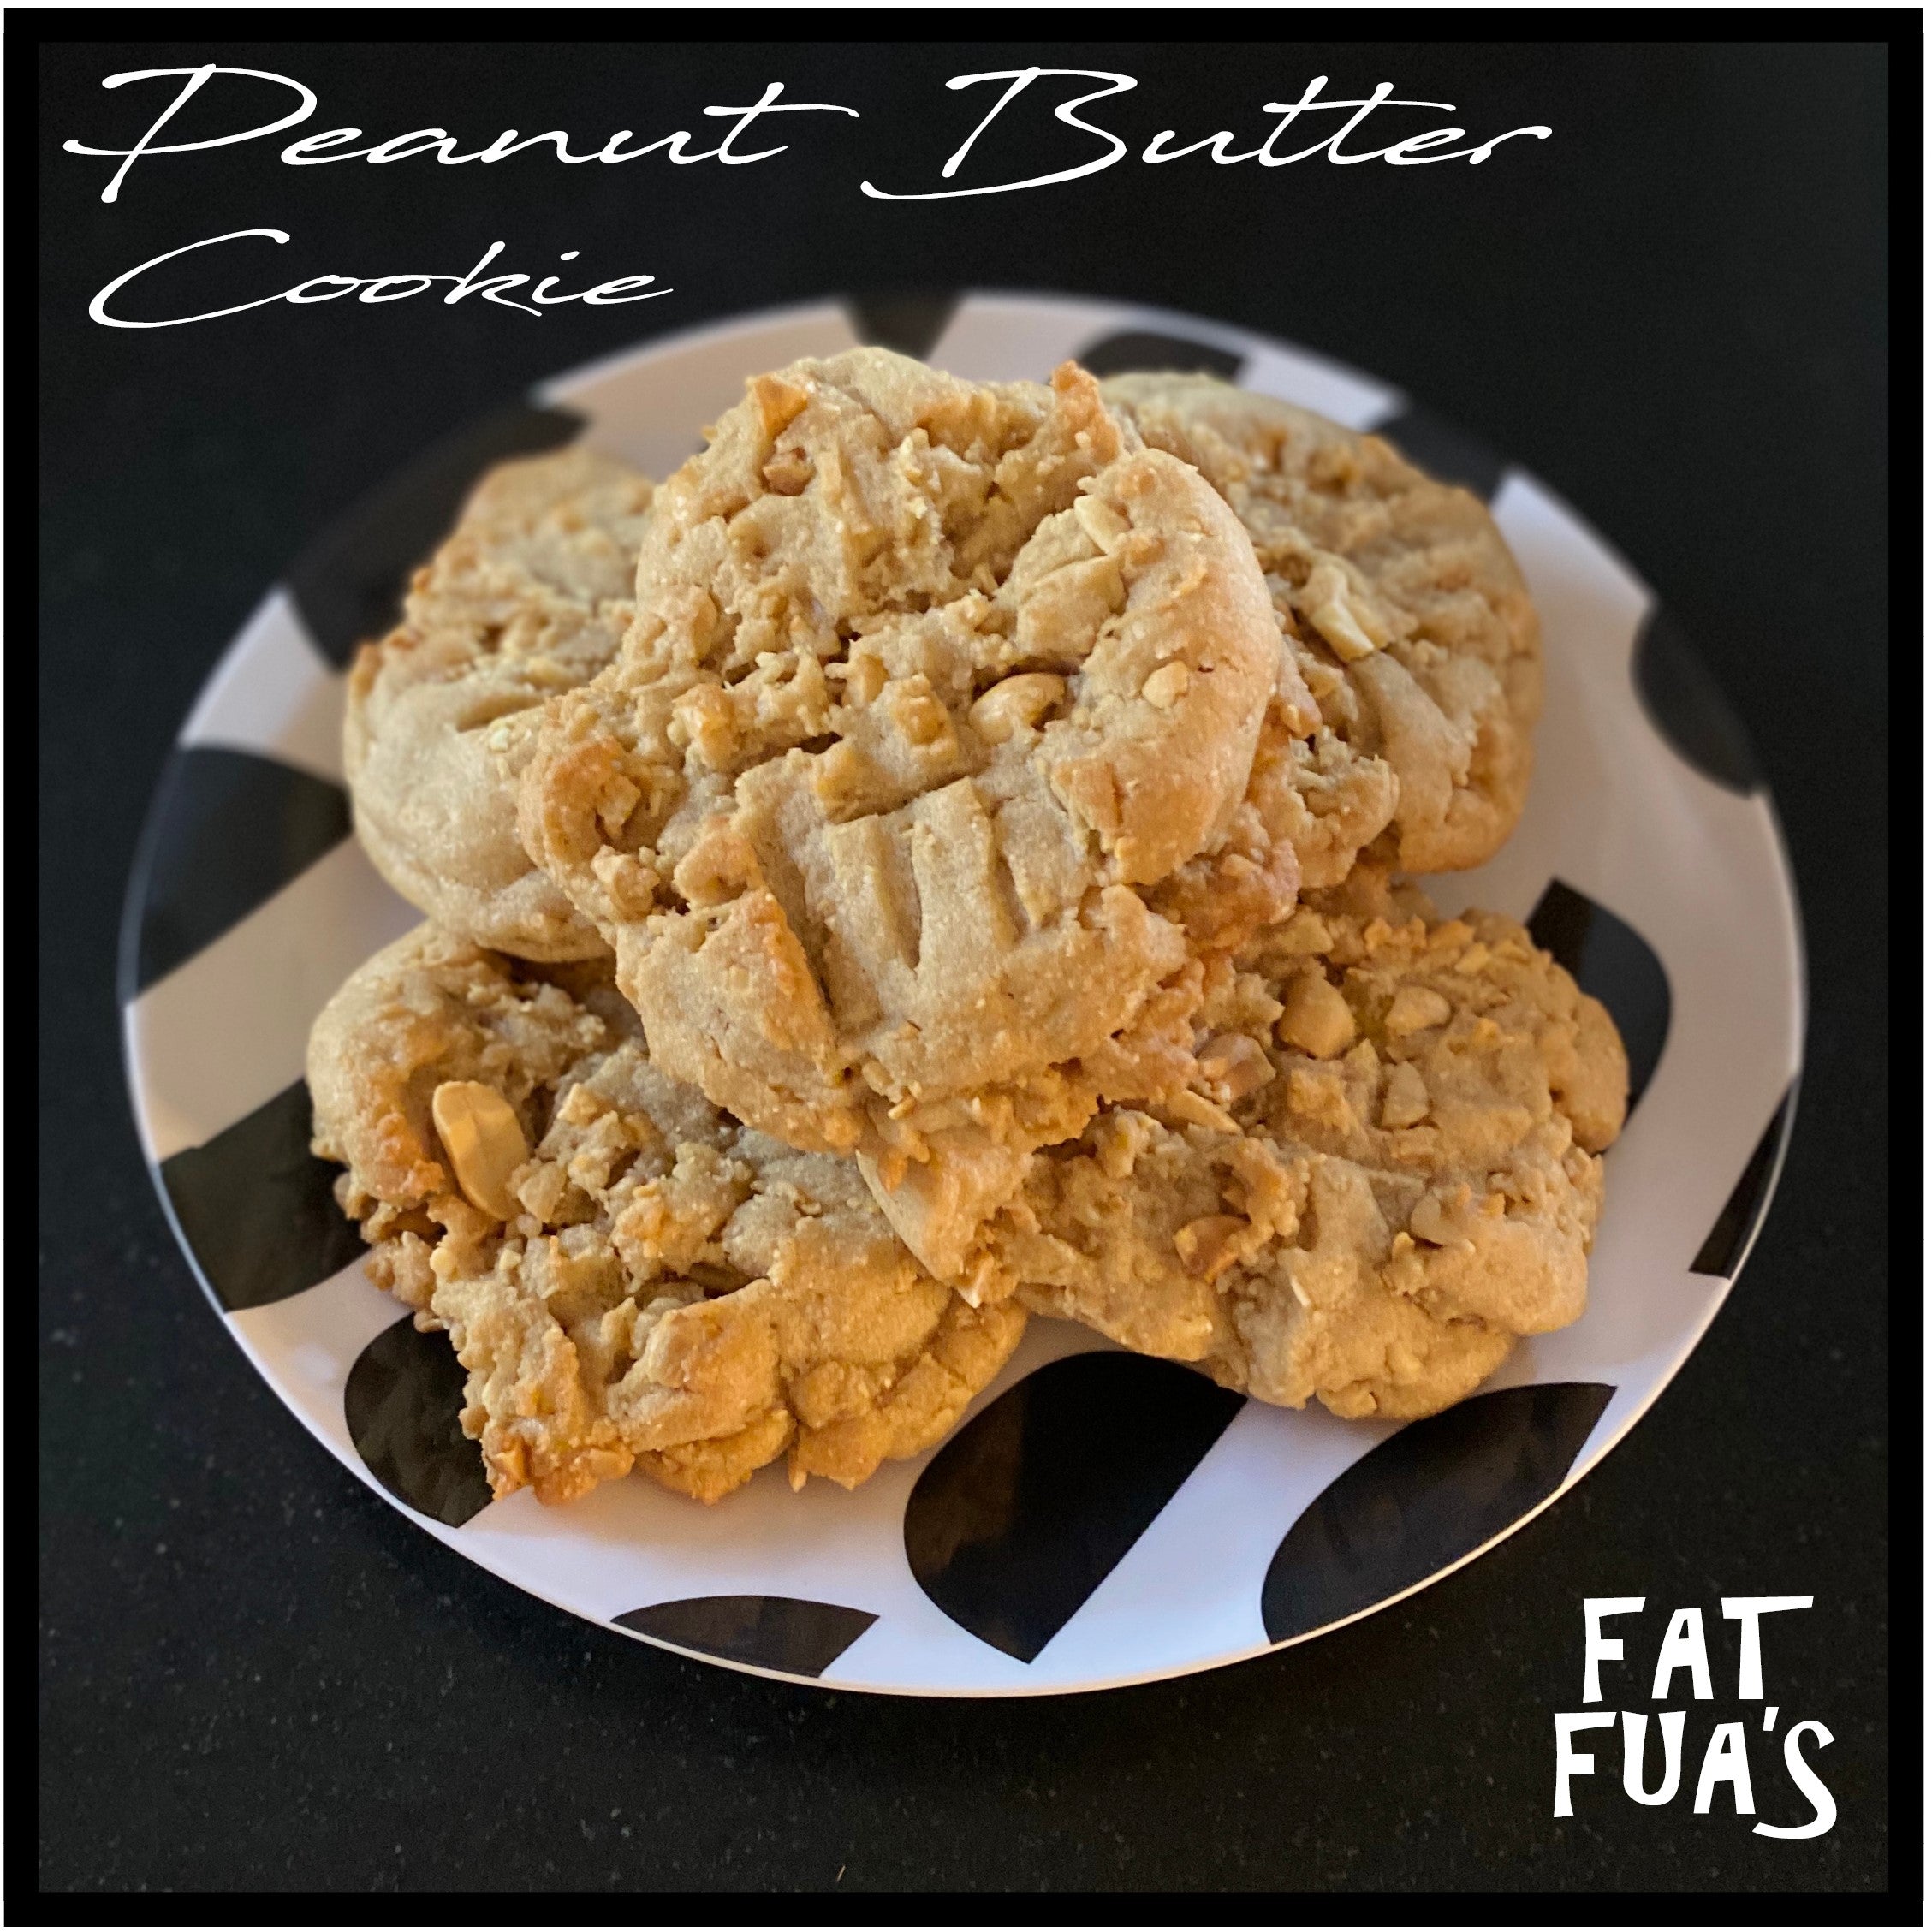 five nutty peanut butter cookies staked on a black and white spotted plate